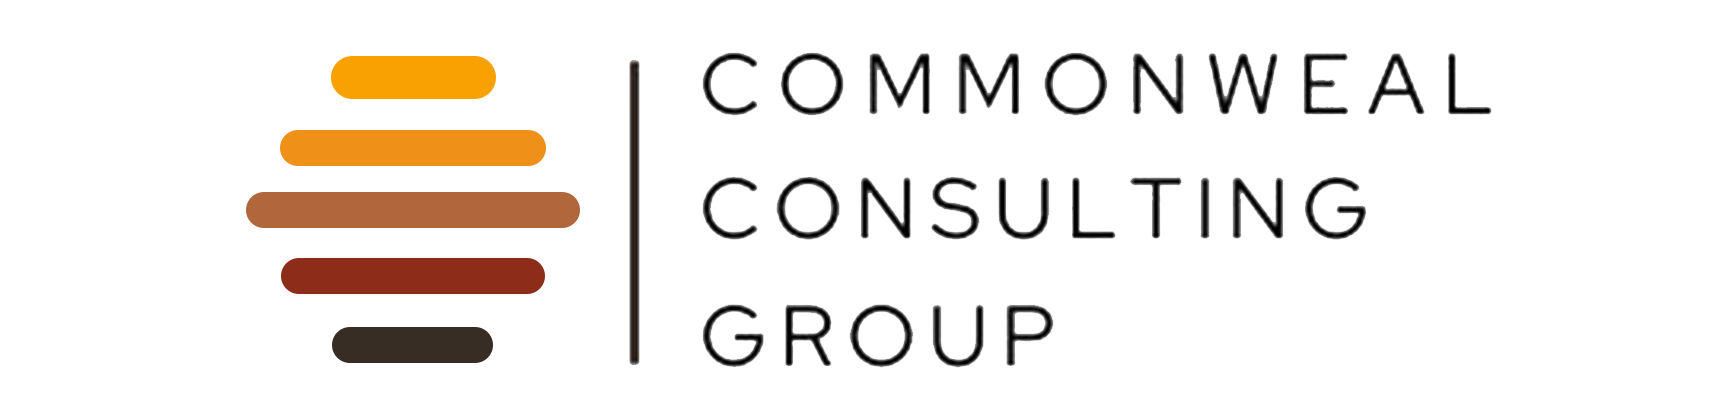 Commonweal Consulting Group, LLC logo